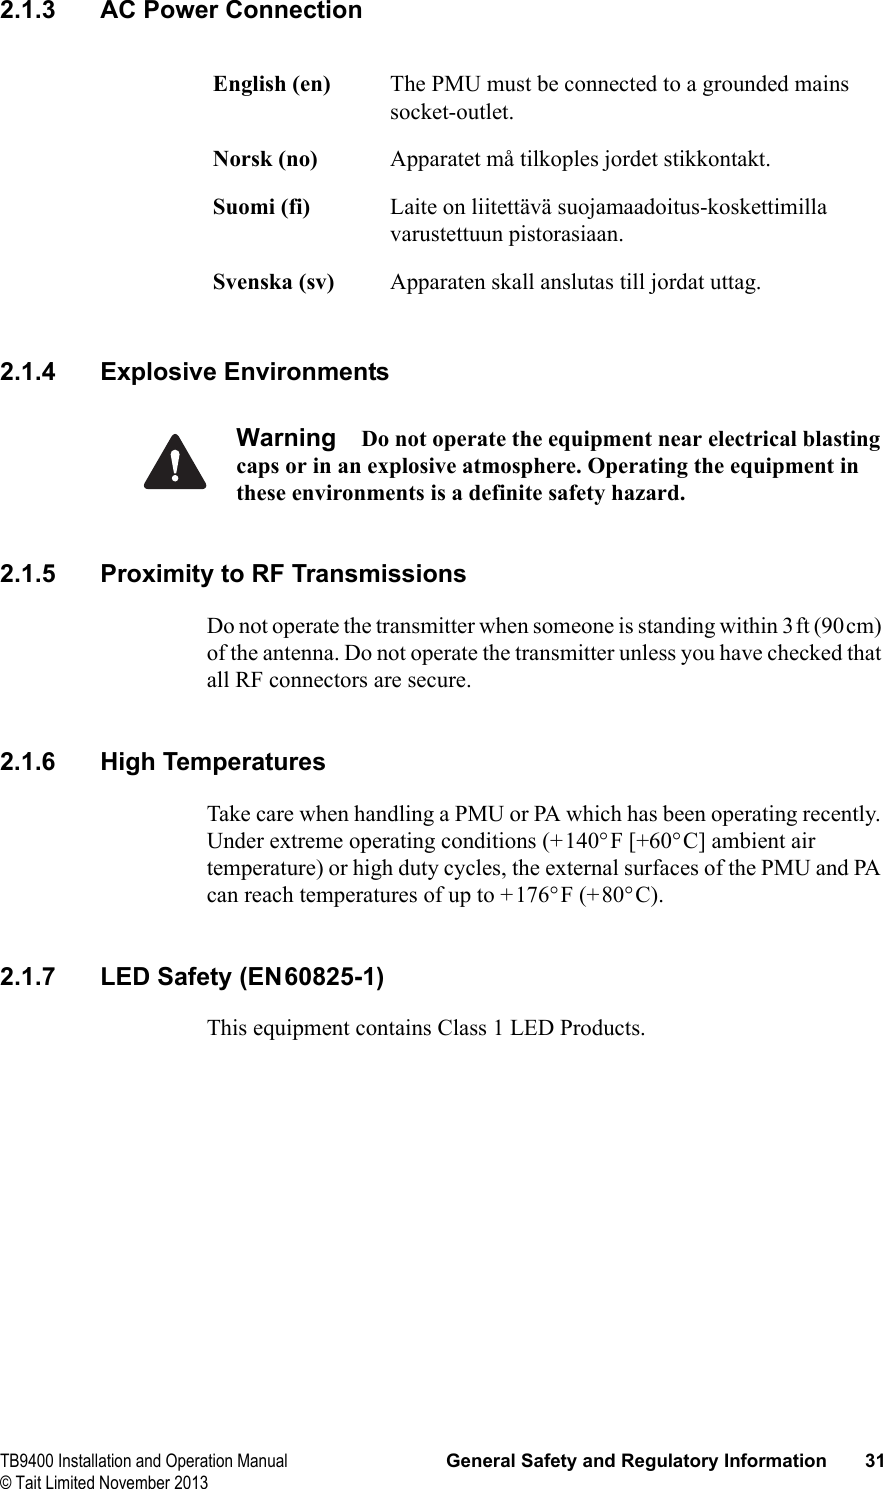  TB9400 Installation and Operation Manual General Safety and Regulatory Information 31© Tait Limited November 20132.1.3 AC Power Connection2.1.4 Explosive EnvironmentsWarning Do not operate the equipment near electrical blasting caps or in an explosive atmosphere. Operating the equipment in these environments is a definite safety hazard.2.1.5 Proximity to RF TransmissionsDo not operate the transmitter when someone is standing within 3ft (90cm) of the antenna. Do not operate the transmitter unless you have checked that all RF connectors are secure.2.1.6 High TemperaturesTake care when handling a PMU or PA which has been operating recently. Under extreme operating conditions (+140°F [+60°C] ambient air temperature) or high duty cycles, the external surfaces of the PMU and PA can reach temperatures of up to +176°F (+80°C).2.1.7 LED Safety (EN60825-1)This equipment contains Class 1 LED Products.English (en) The PMU must be connected to a grounded mains socket-outlet.Norsk (no) Apparatet må tilkoples jordet stikkontakt.Suomi (fi) Laite on liitettävä suojamaadoitus-koskettimilla varustettuun pistorasiaan.Svenska (sv) Apparaten skall anslutas till jordat uttag.